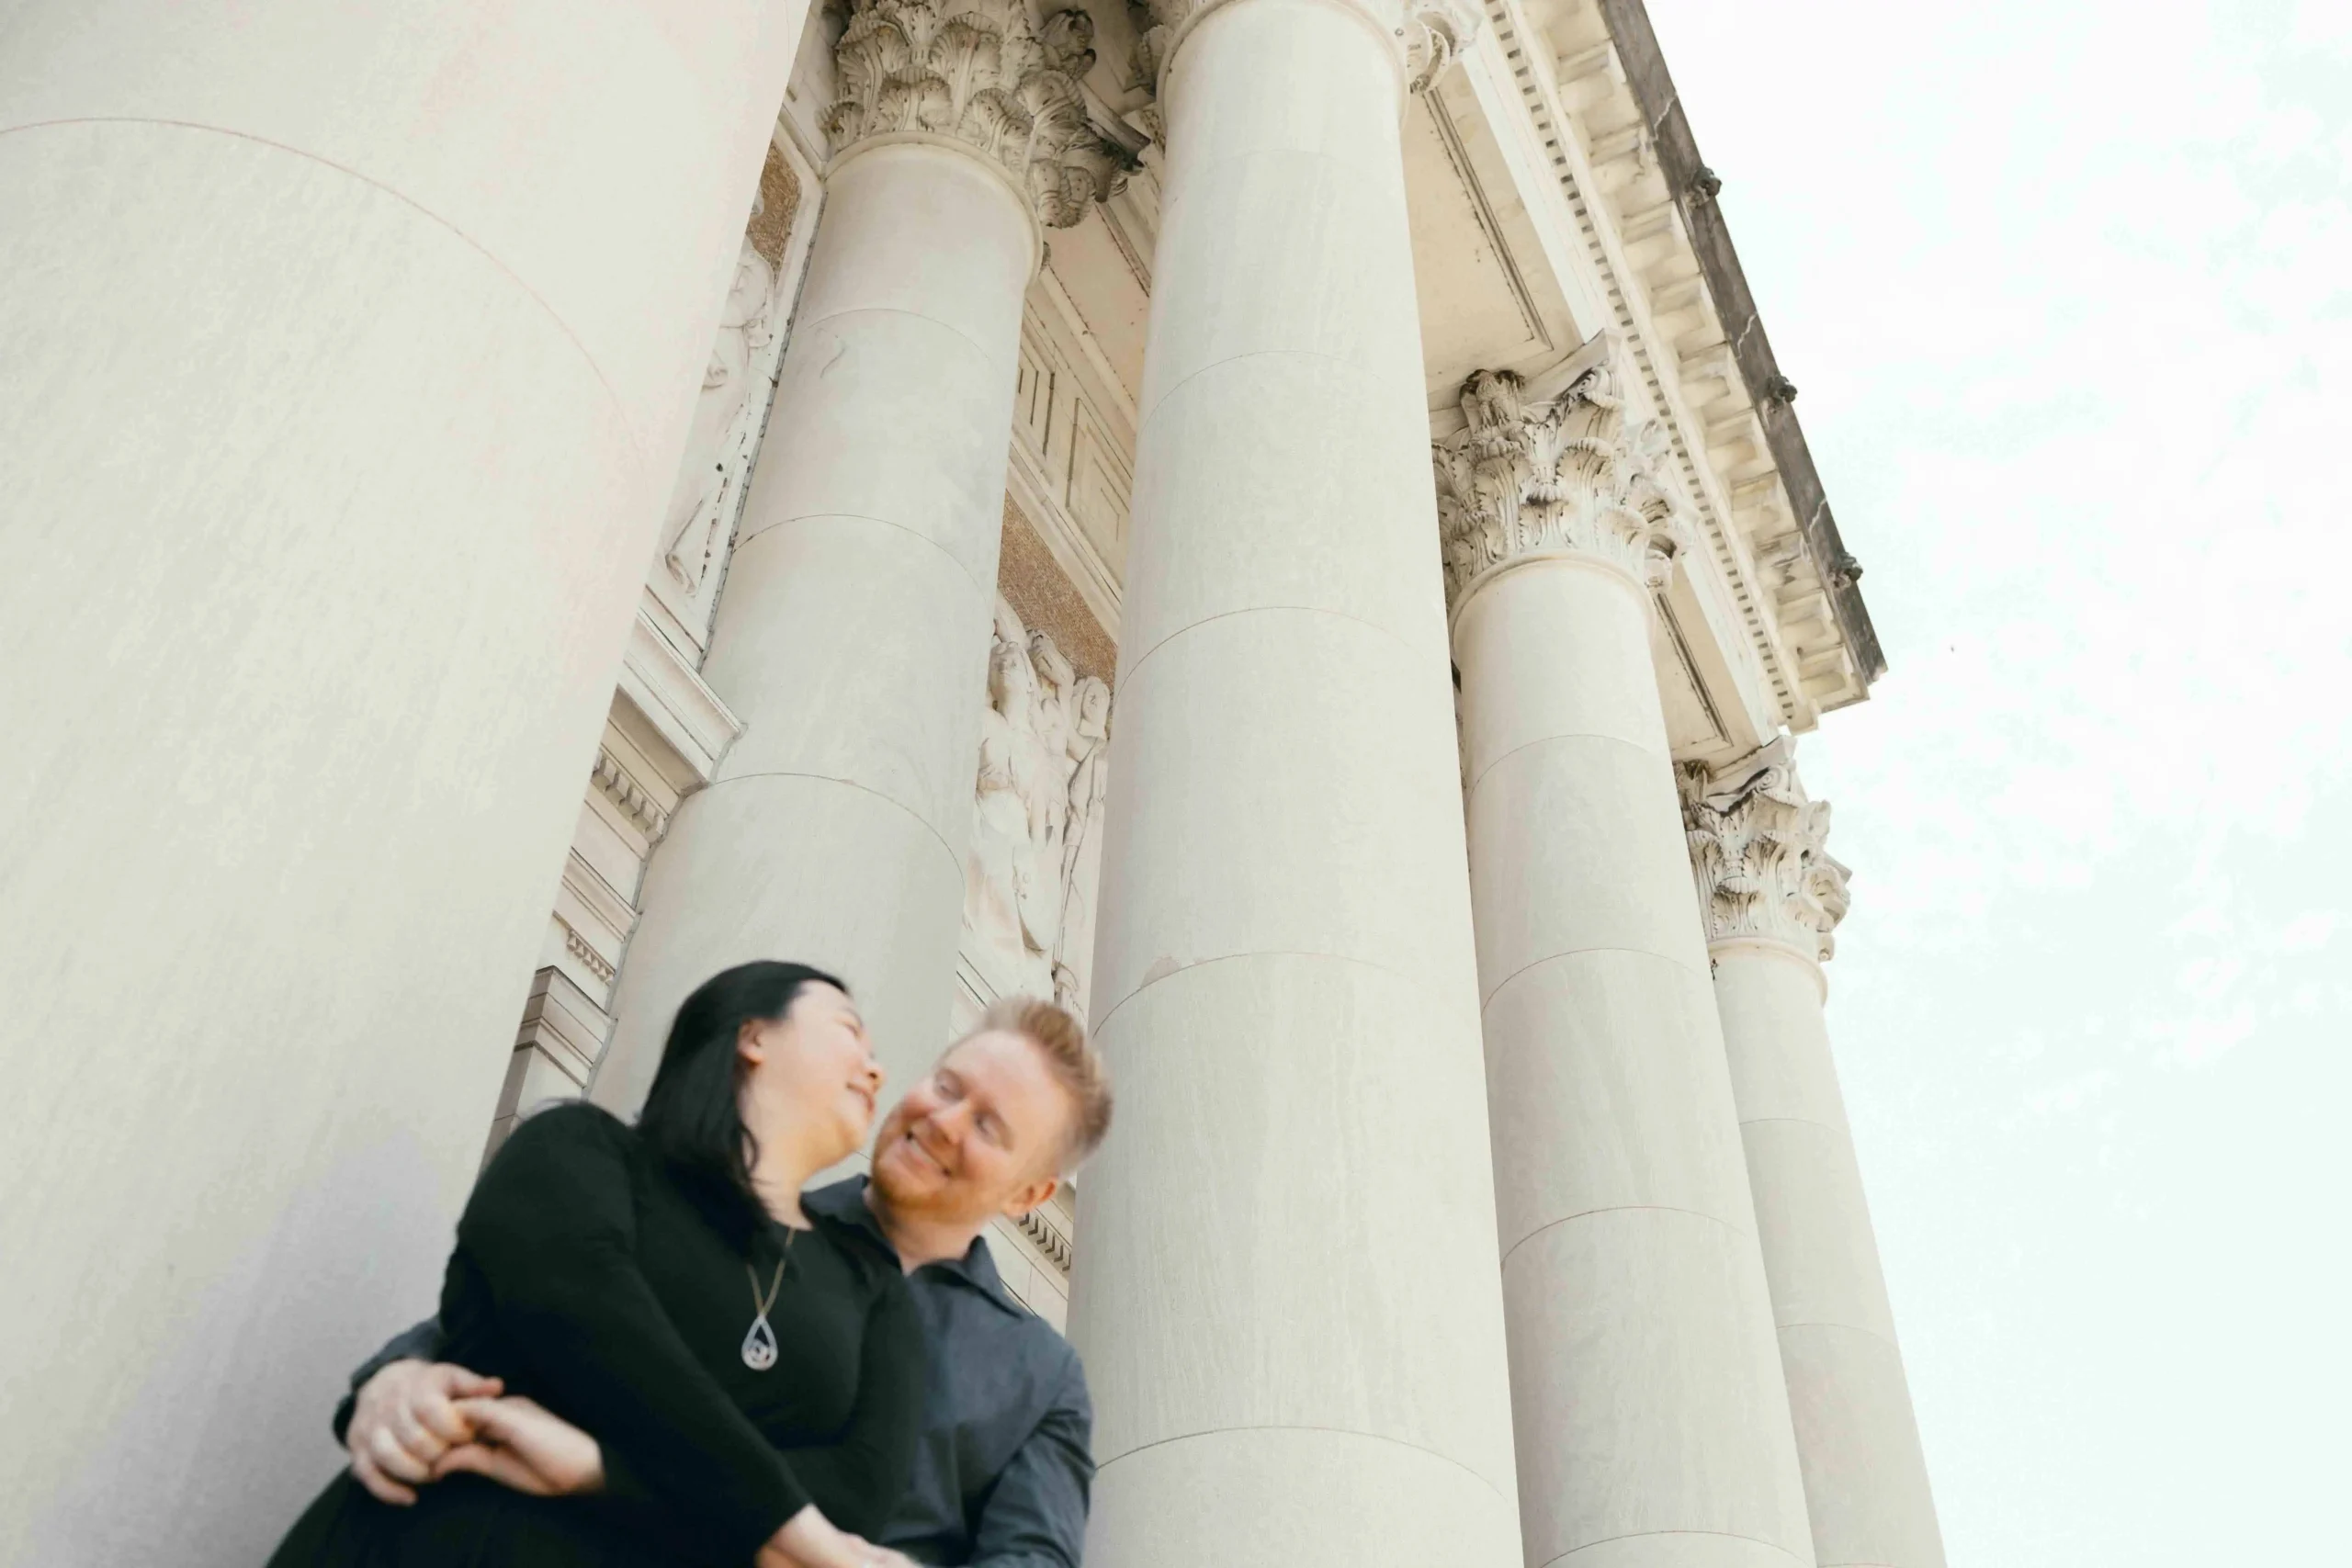 A couple smiling and embracing in front of a museum with Greek columns in St. Louis, Missouri.